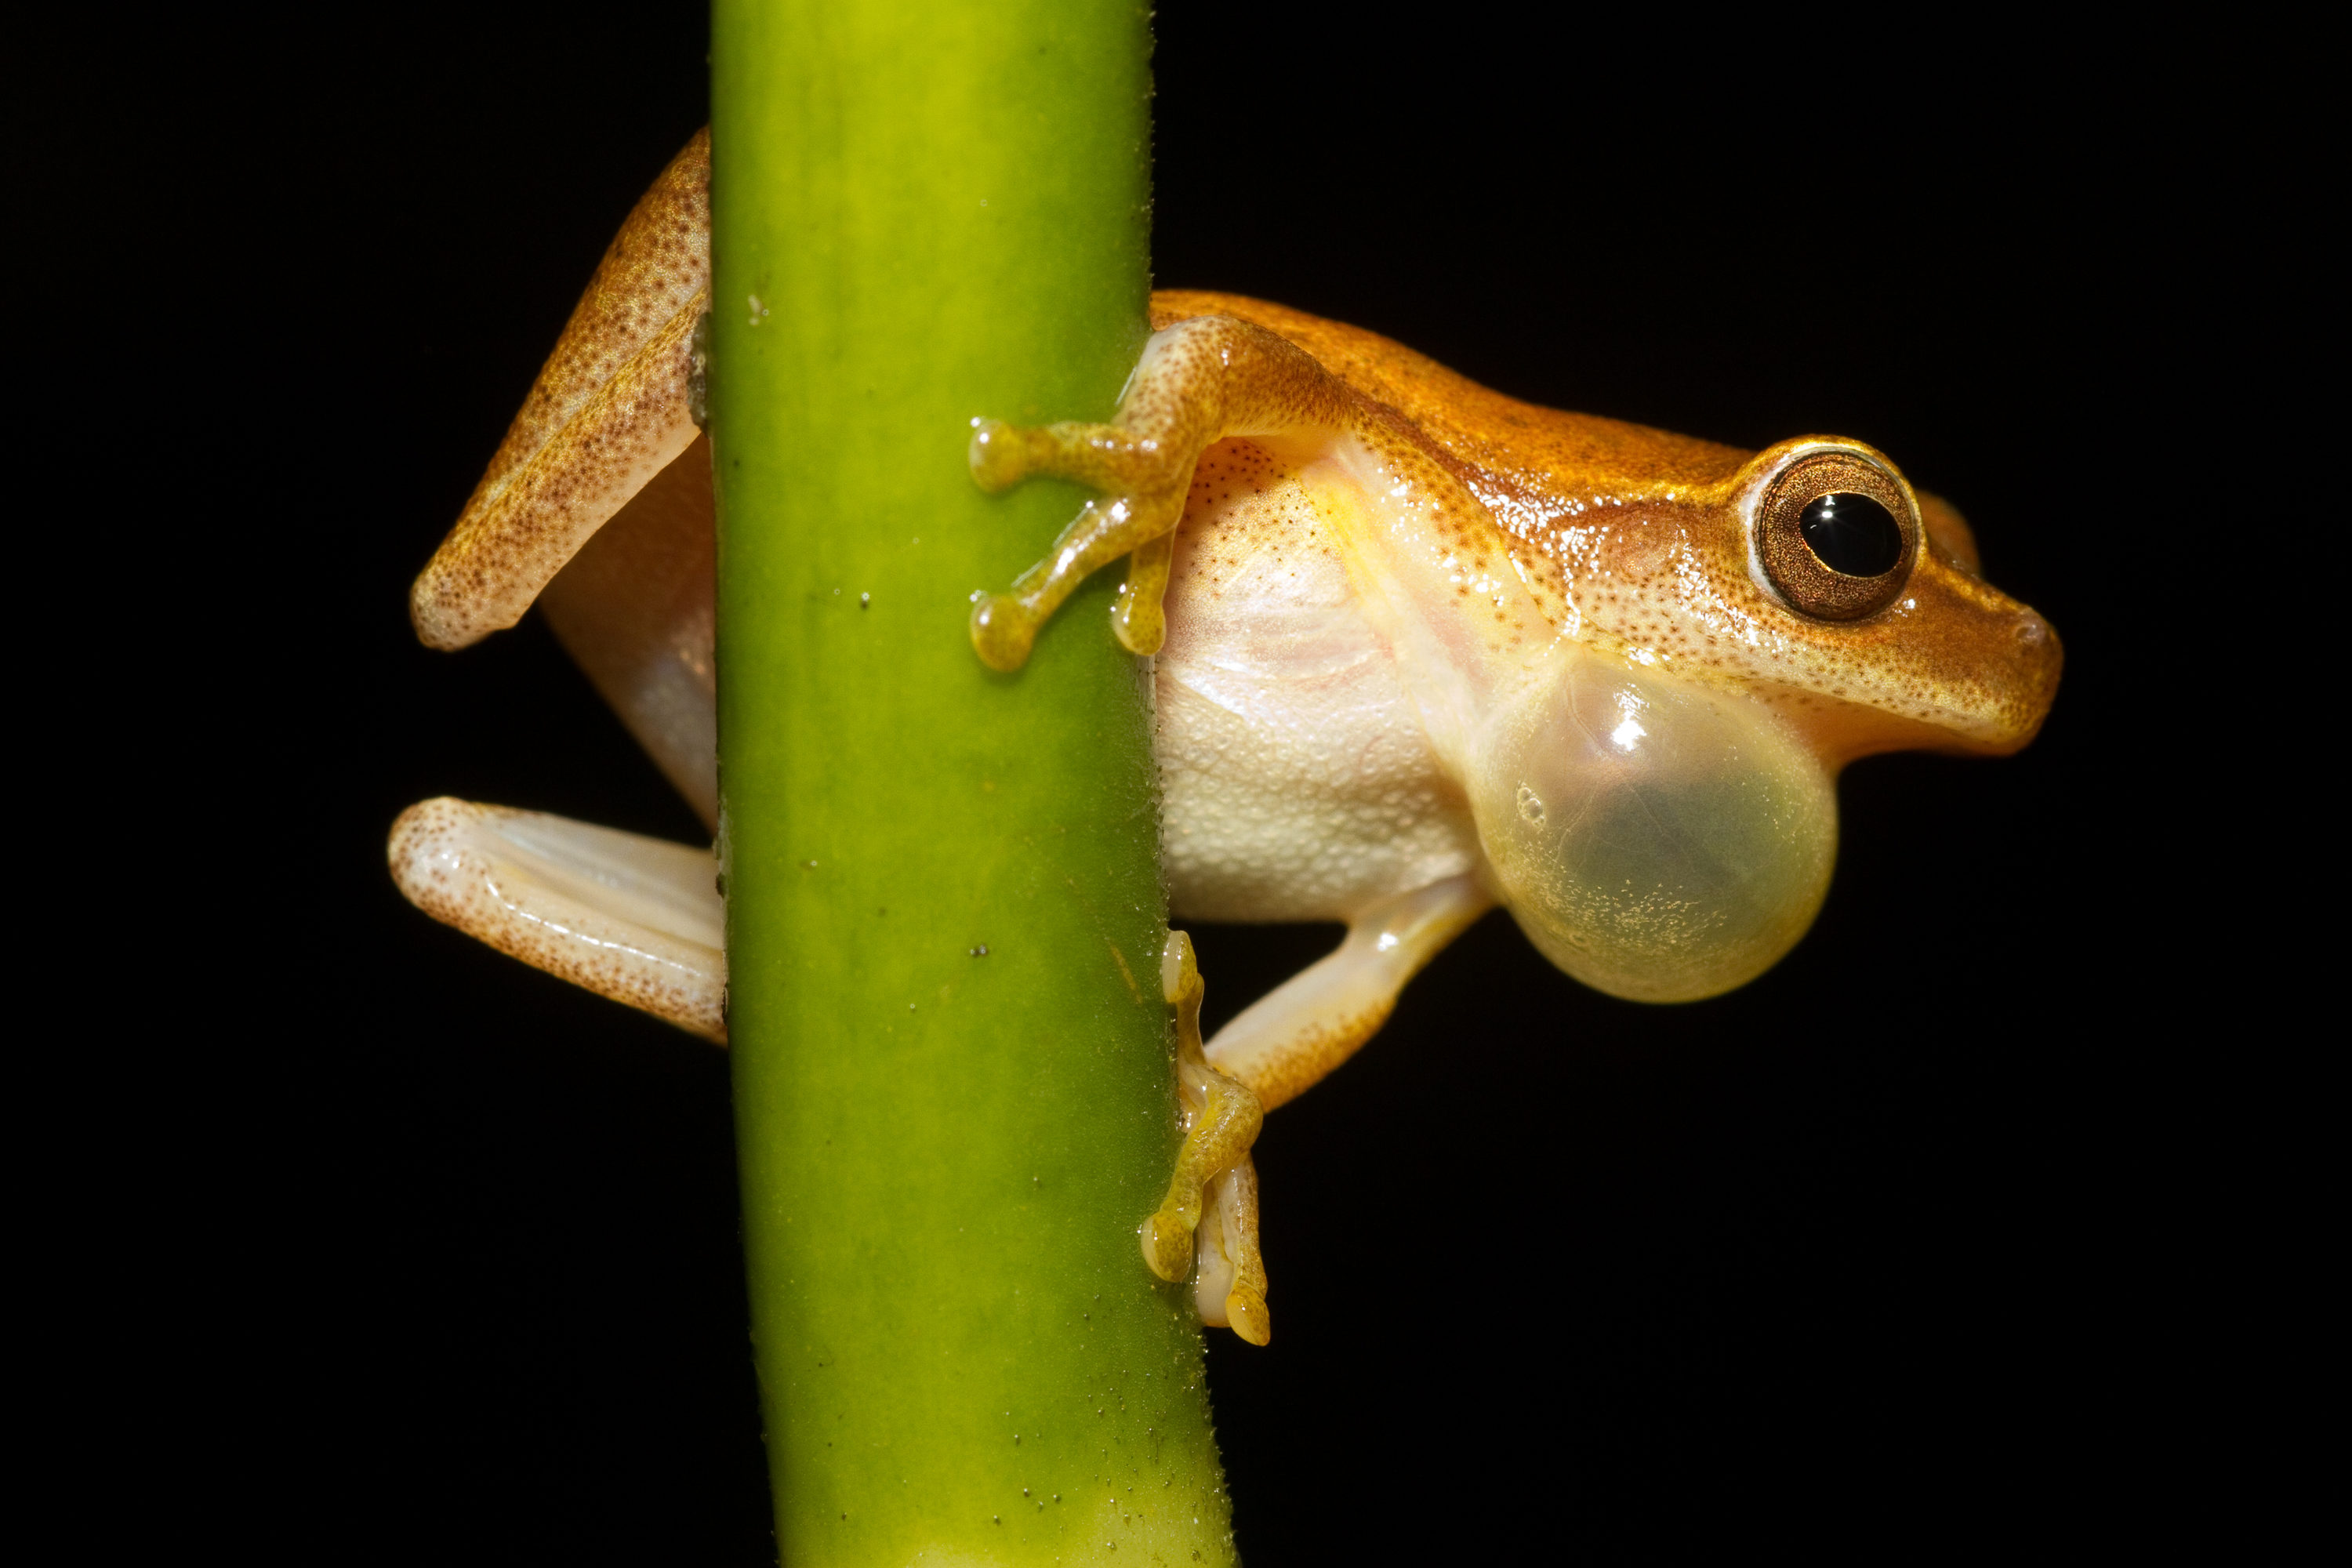 Tree Frogs - All-About Small & Mighty Amphibians - Learn About Nature